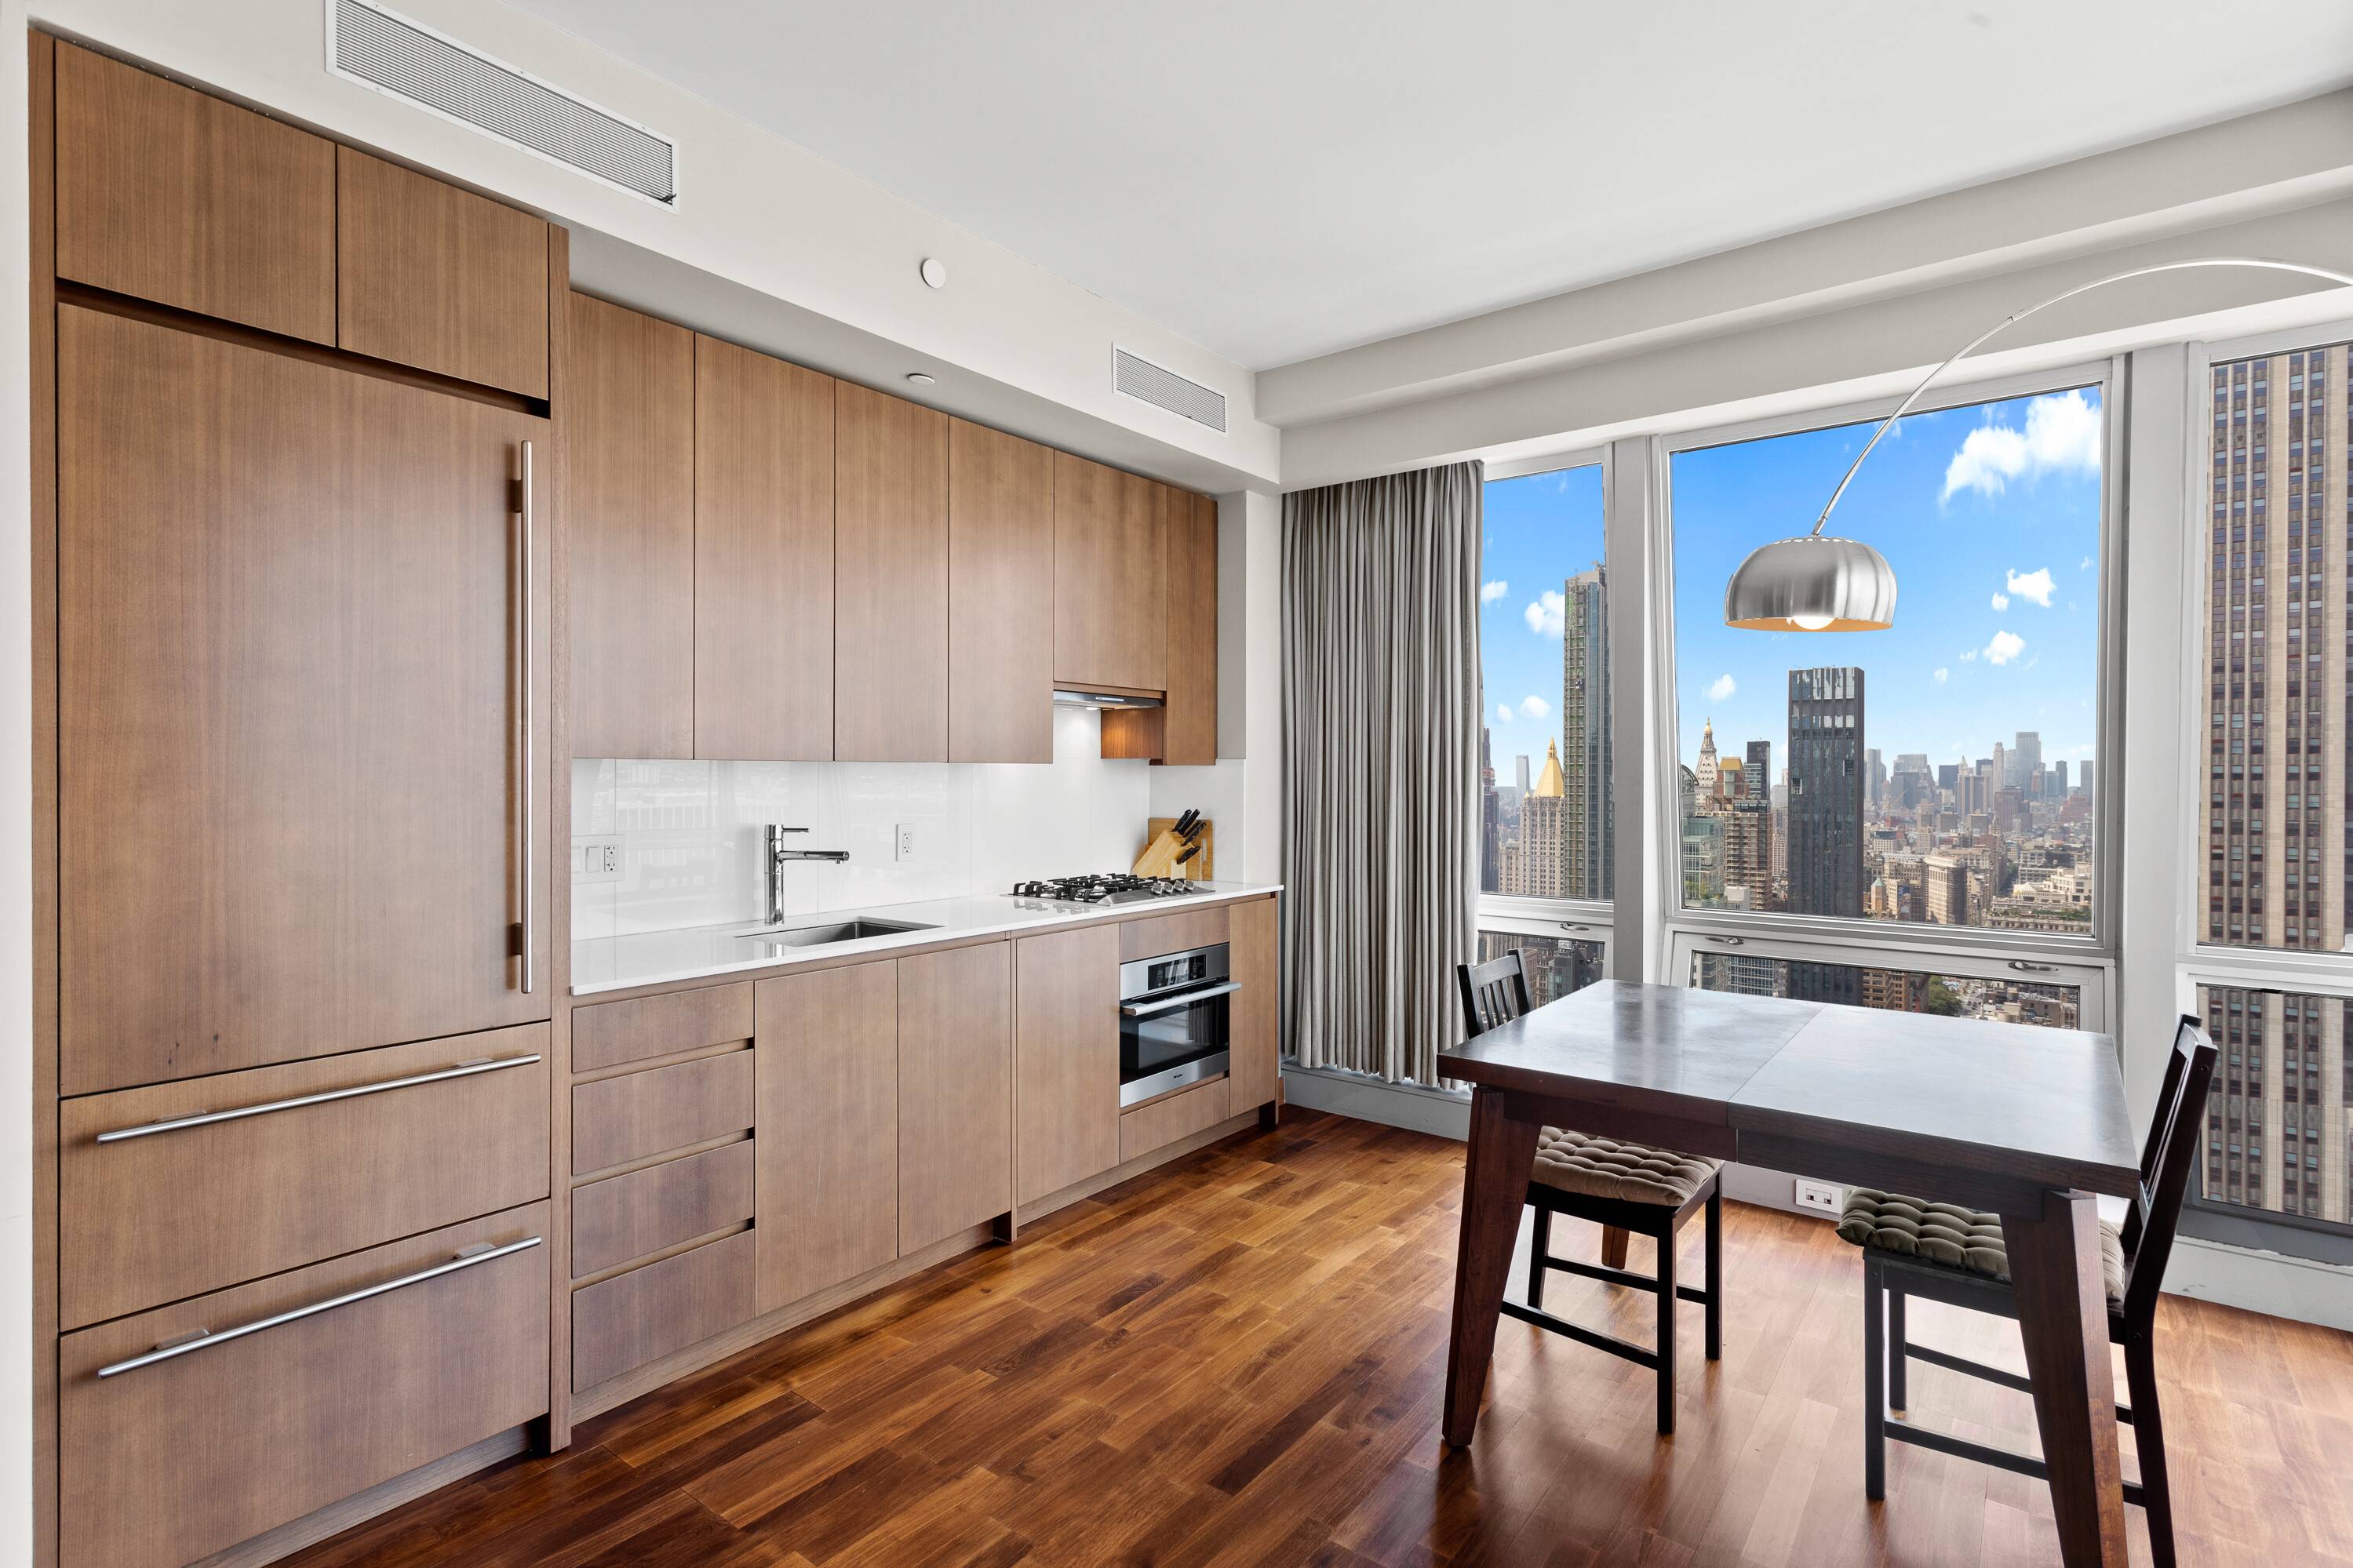 Fully furnished 1 bedroom, 1.5 bath condo with plenty of natural sunlight and spectacular views of the Empire State Building and Hudson River